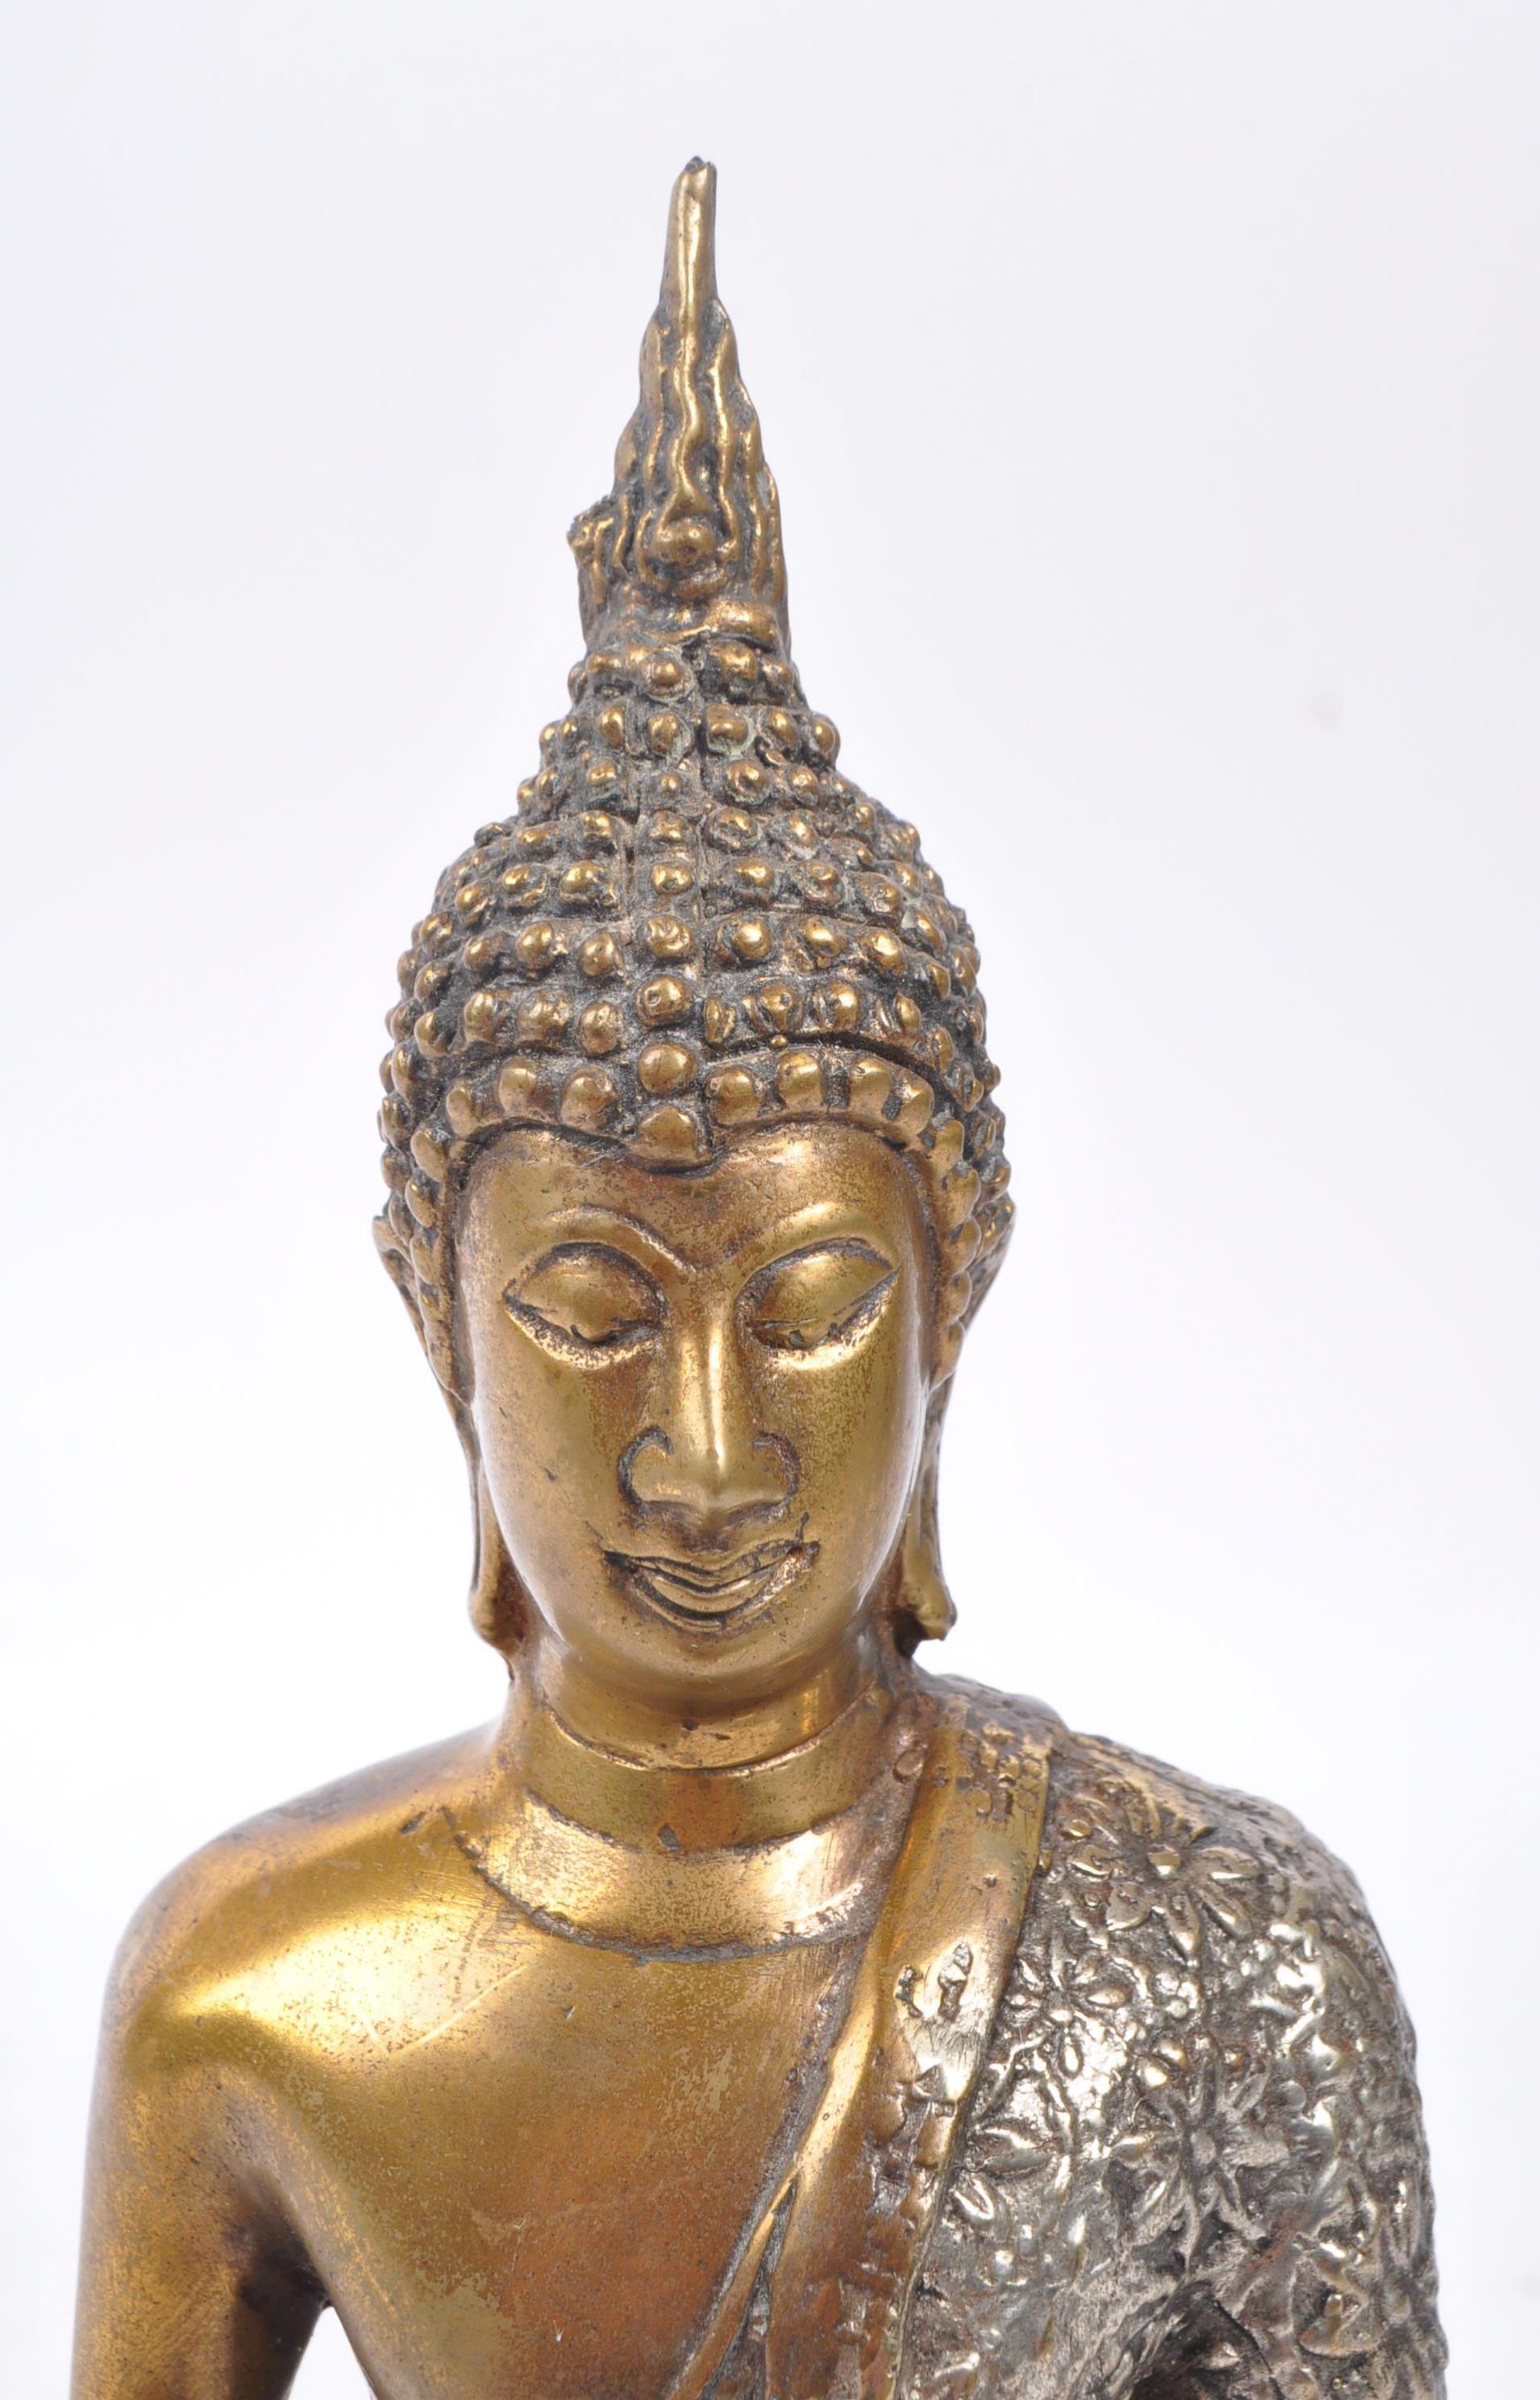 PAINTED GOLD AND SILVER BRONZE BUDDHA FIGURE - Image 5 of 7